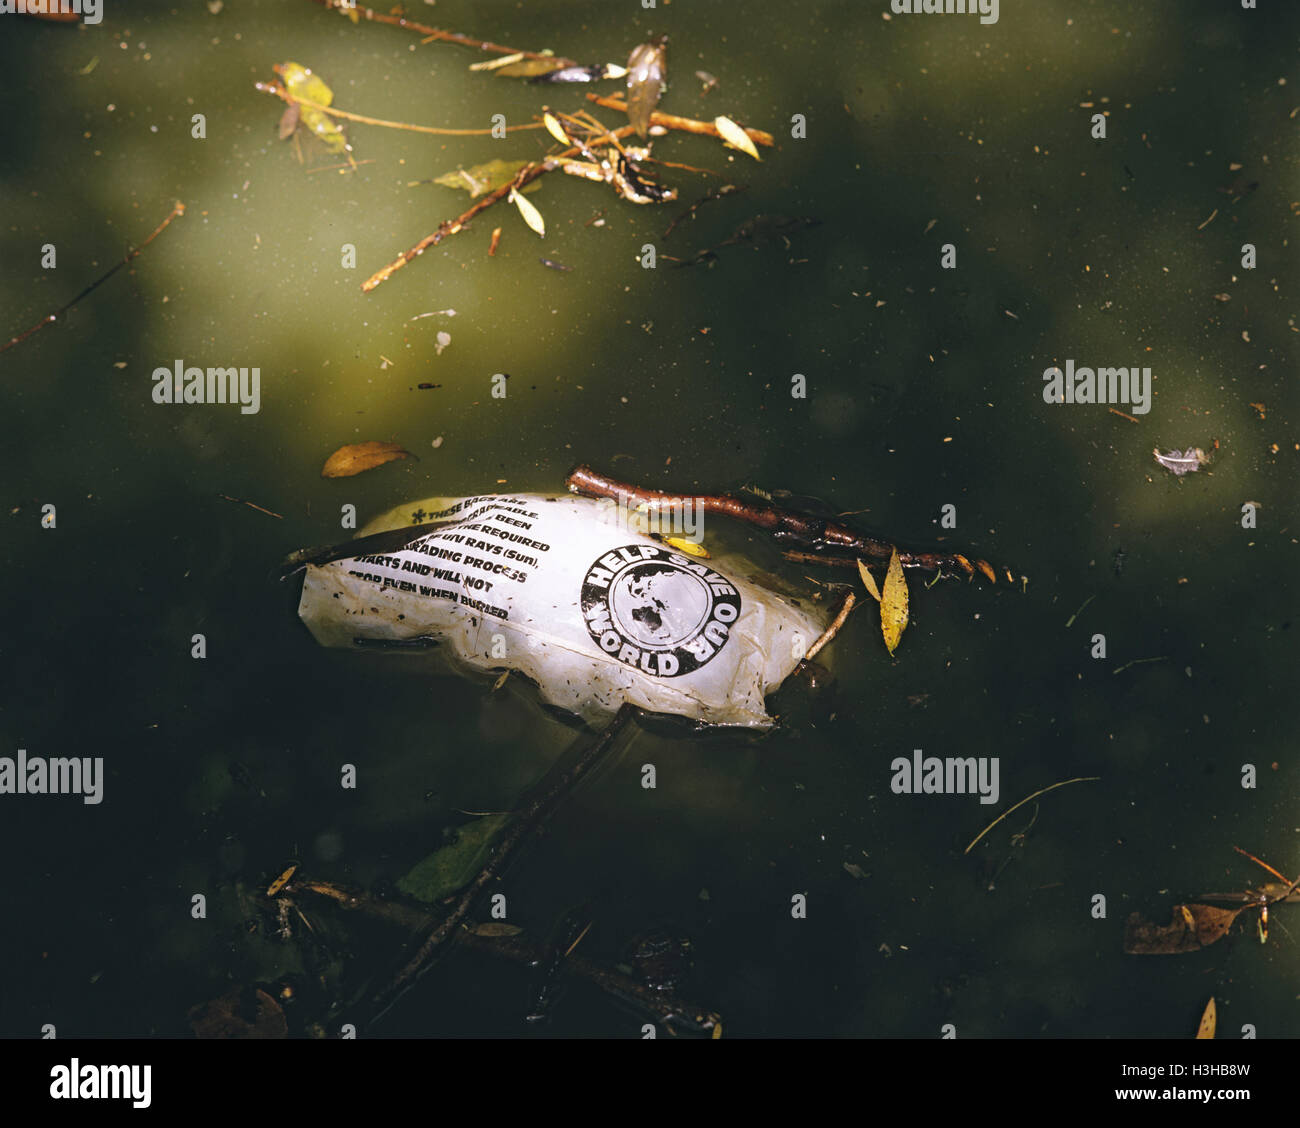 Polluted water with floating rubbish Stock Photo